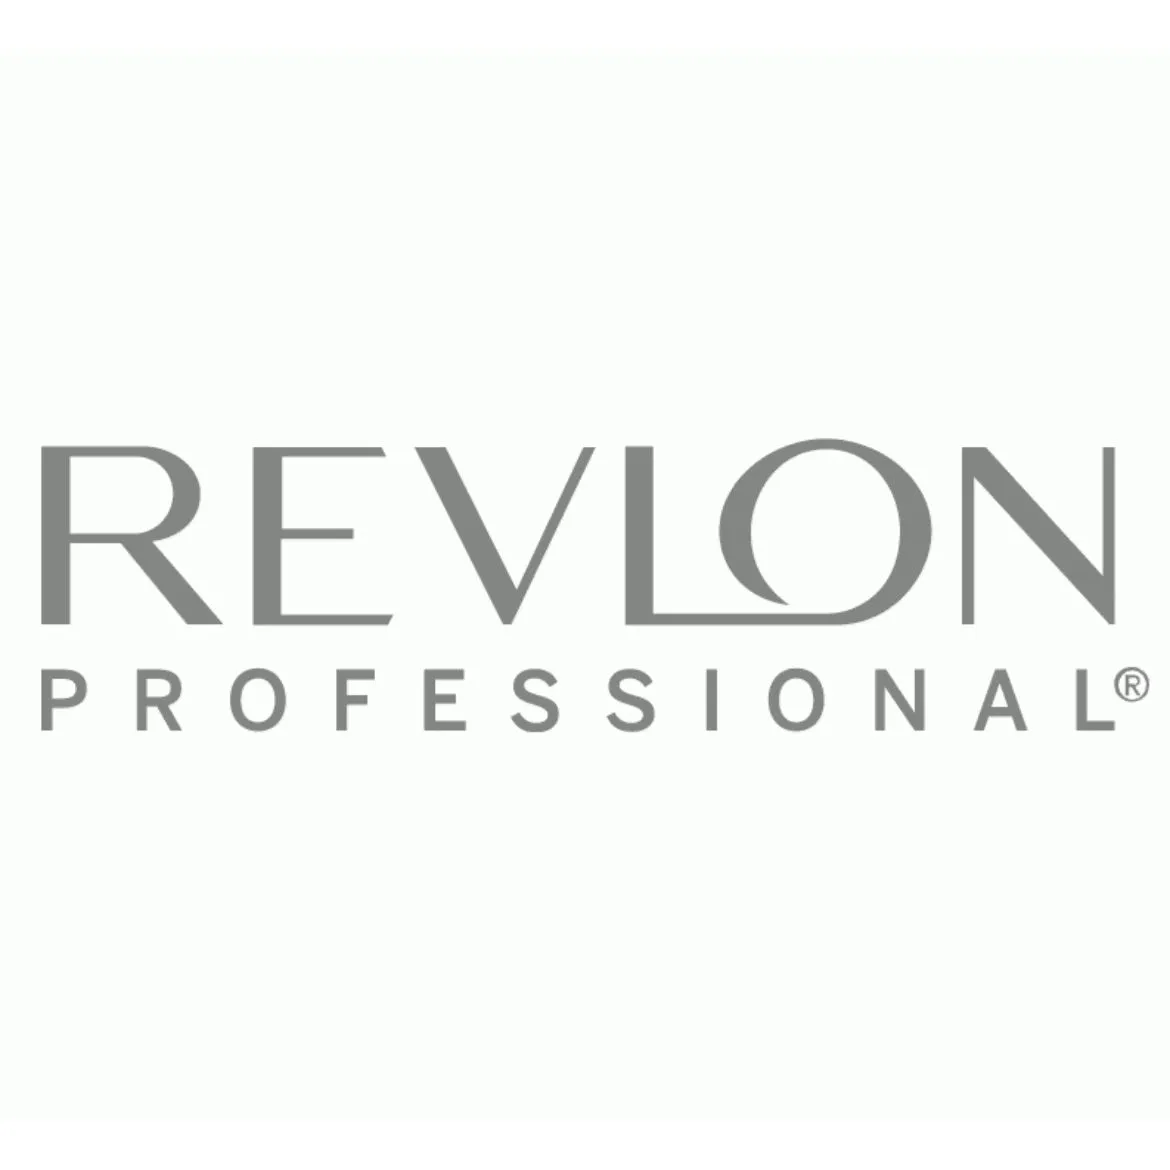 Revlon Professional Hair Products